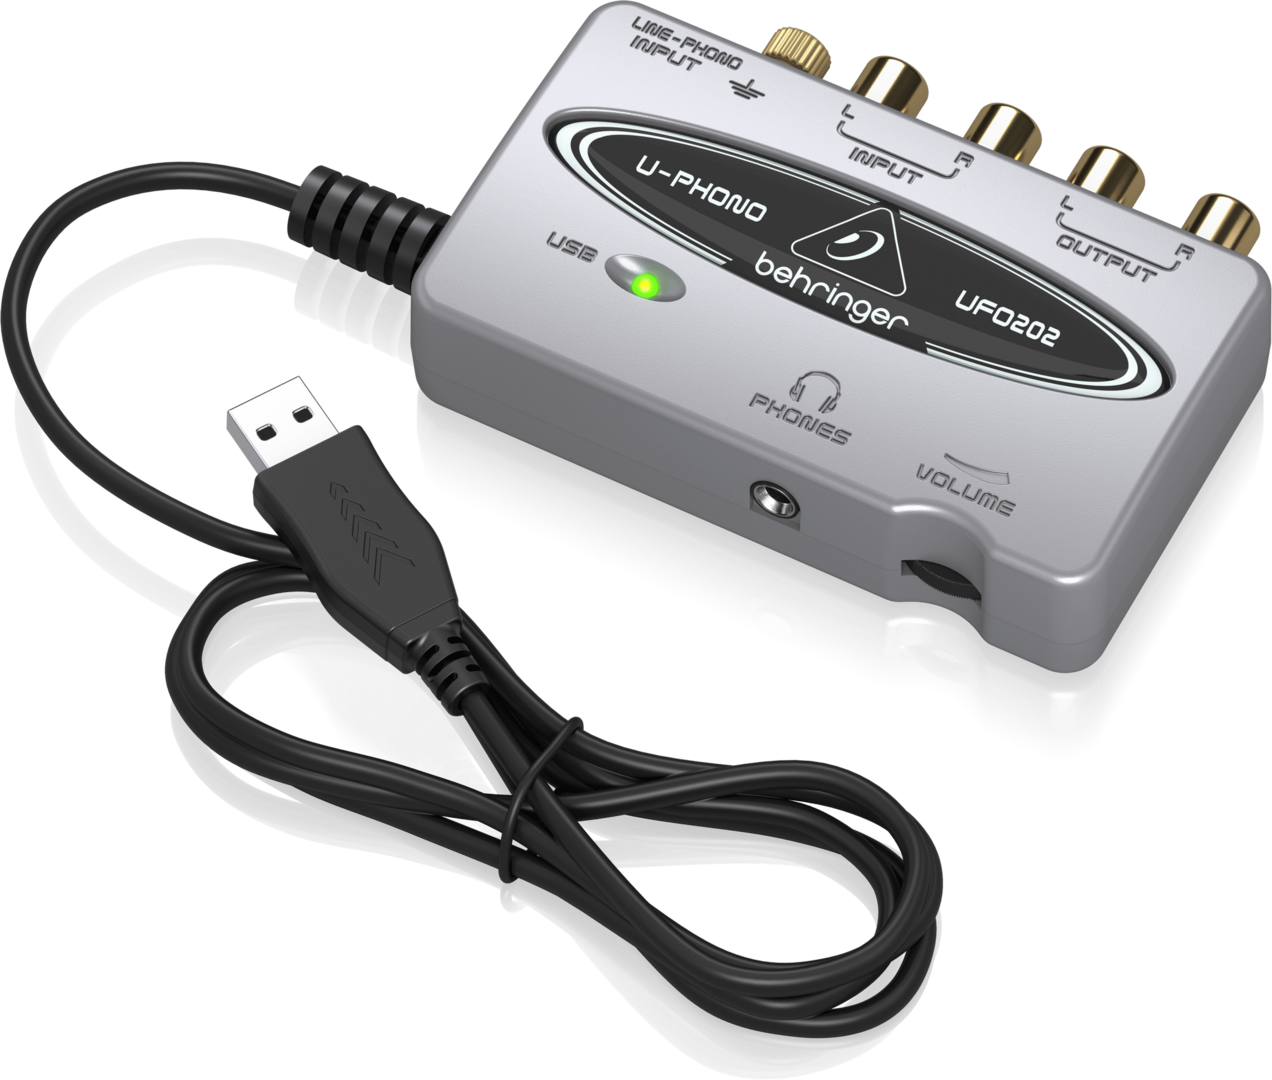 Behringer UFO202 Audiophile USB/Audio Interface with Built-In Phono Preamp for Digitalizing Your Tapes and Vinyl Records